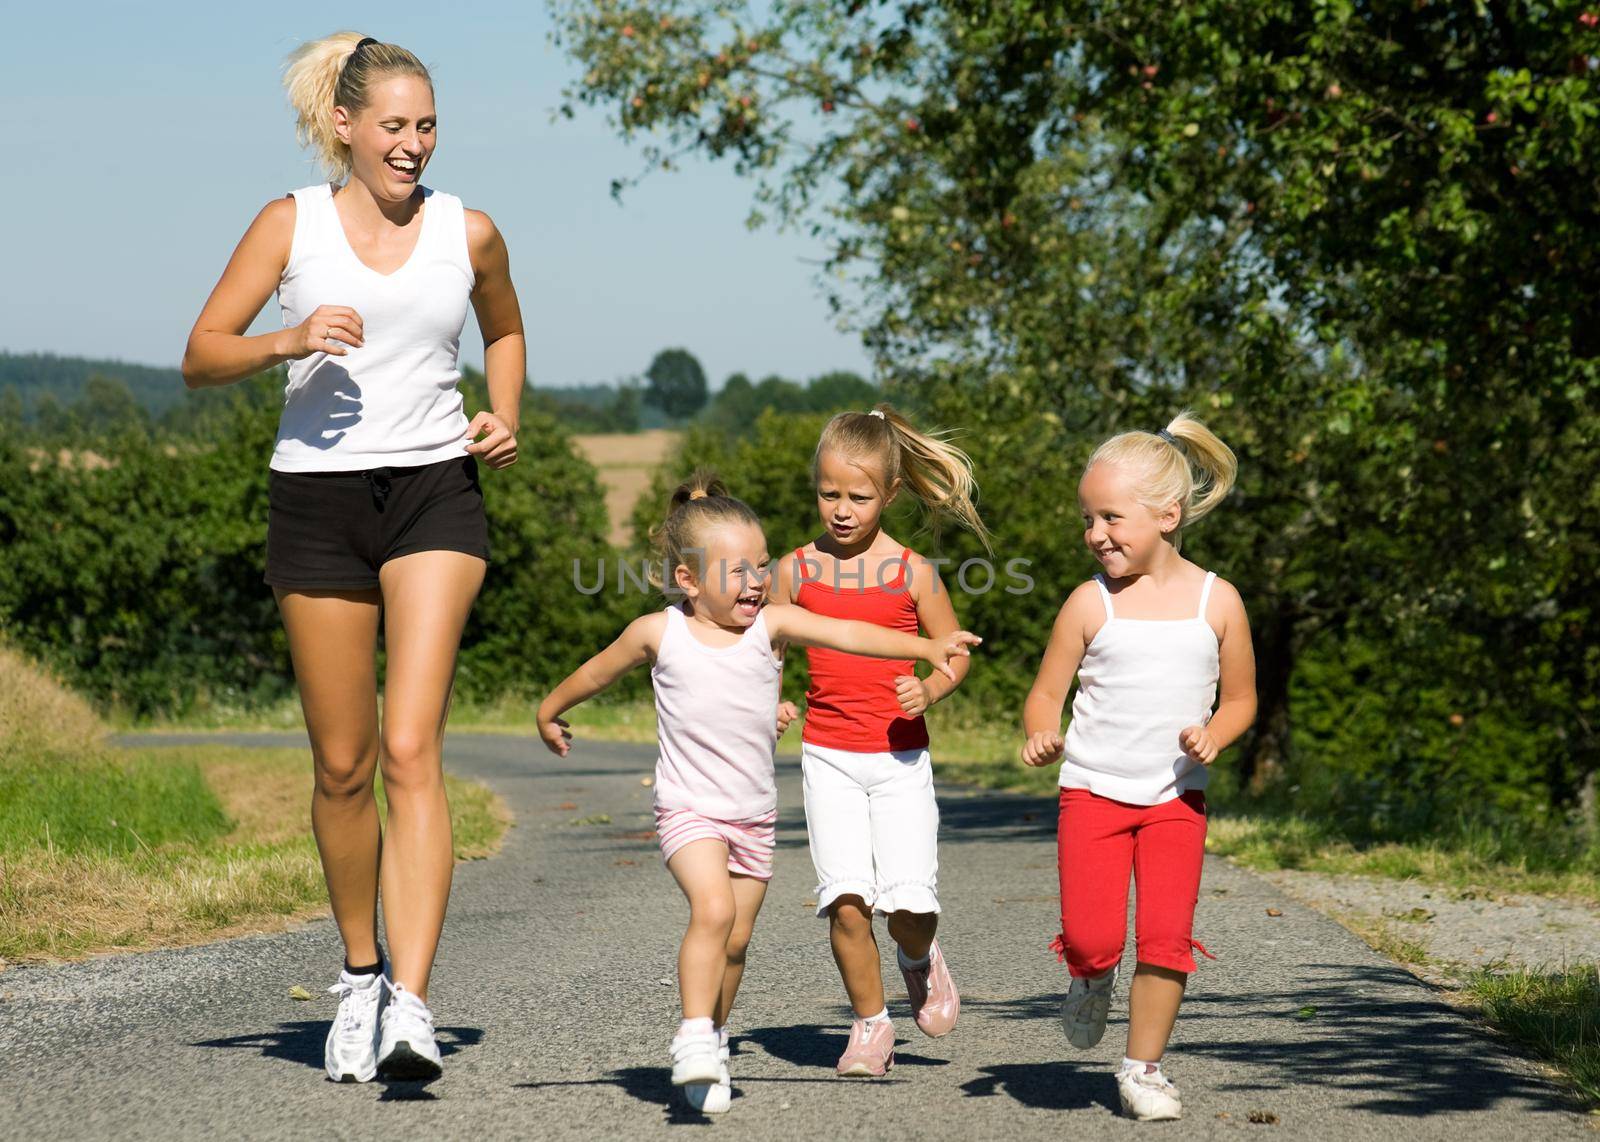 A young mother jogging with her three little daughters